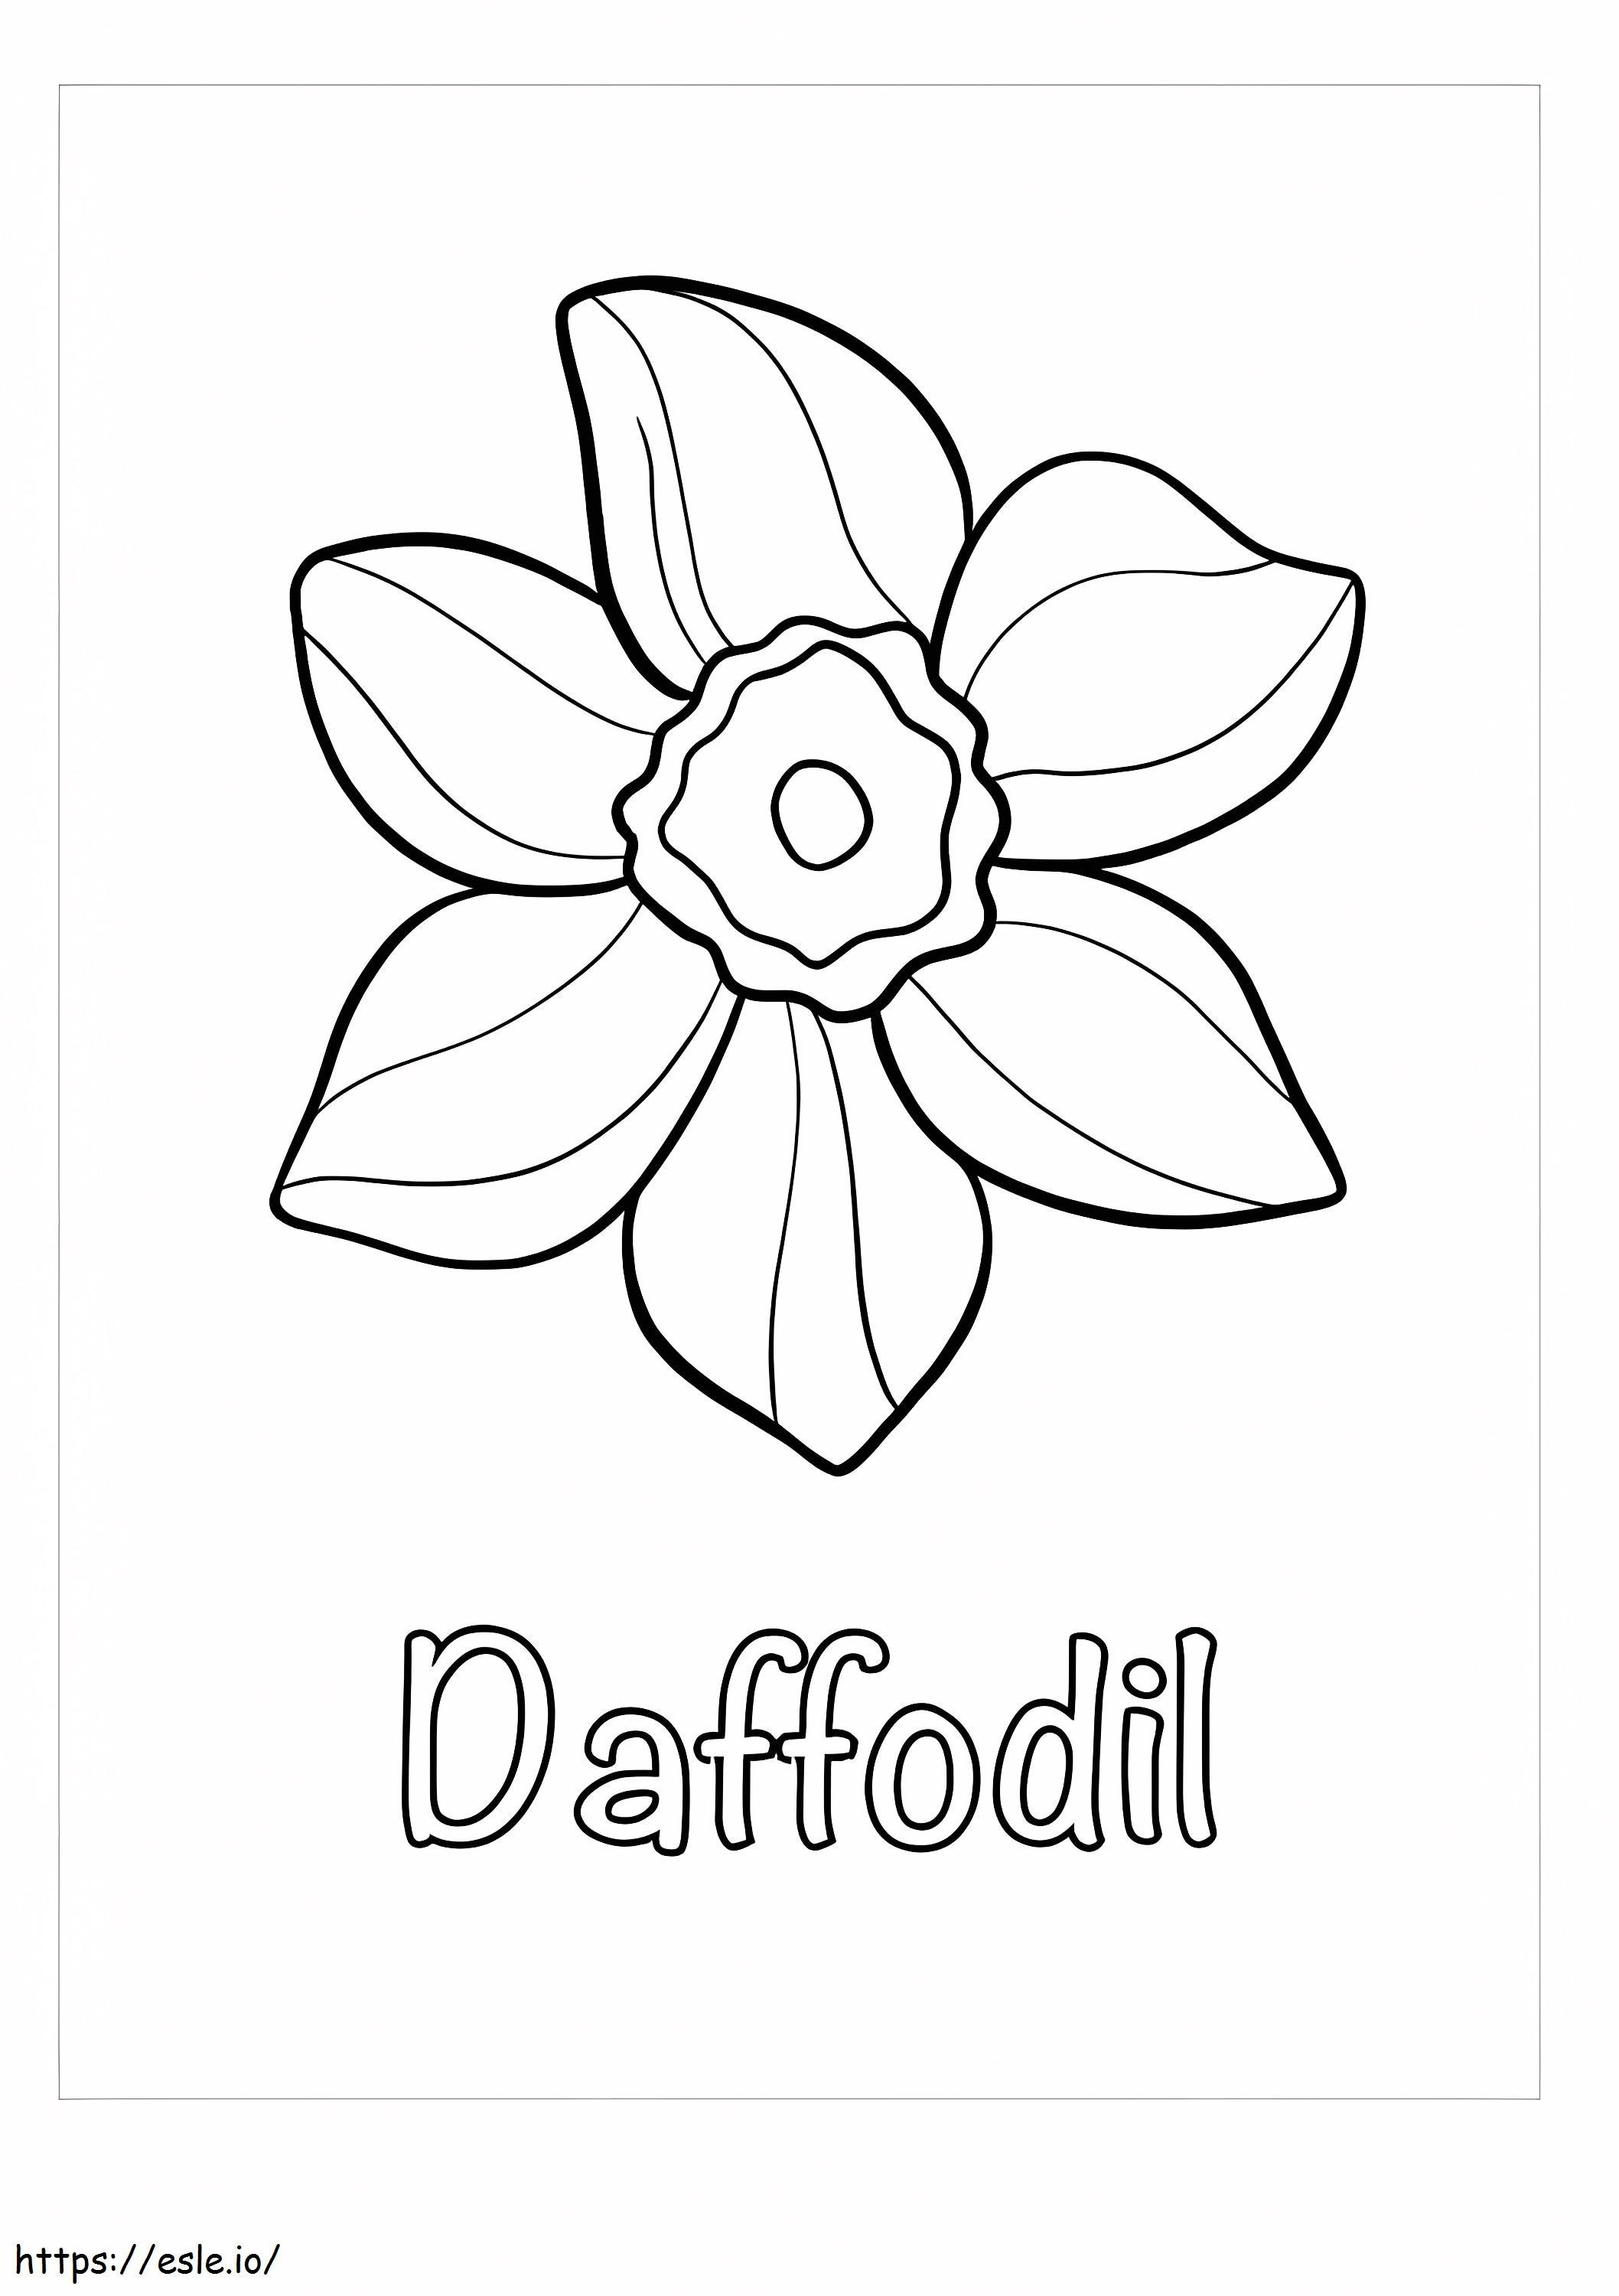 Sweet Daffodils coloring page